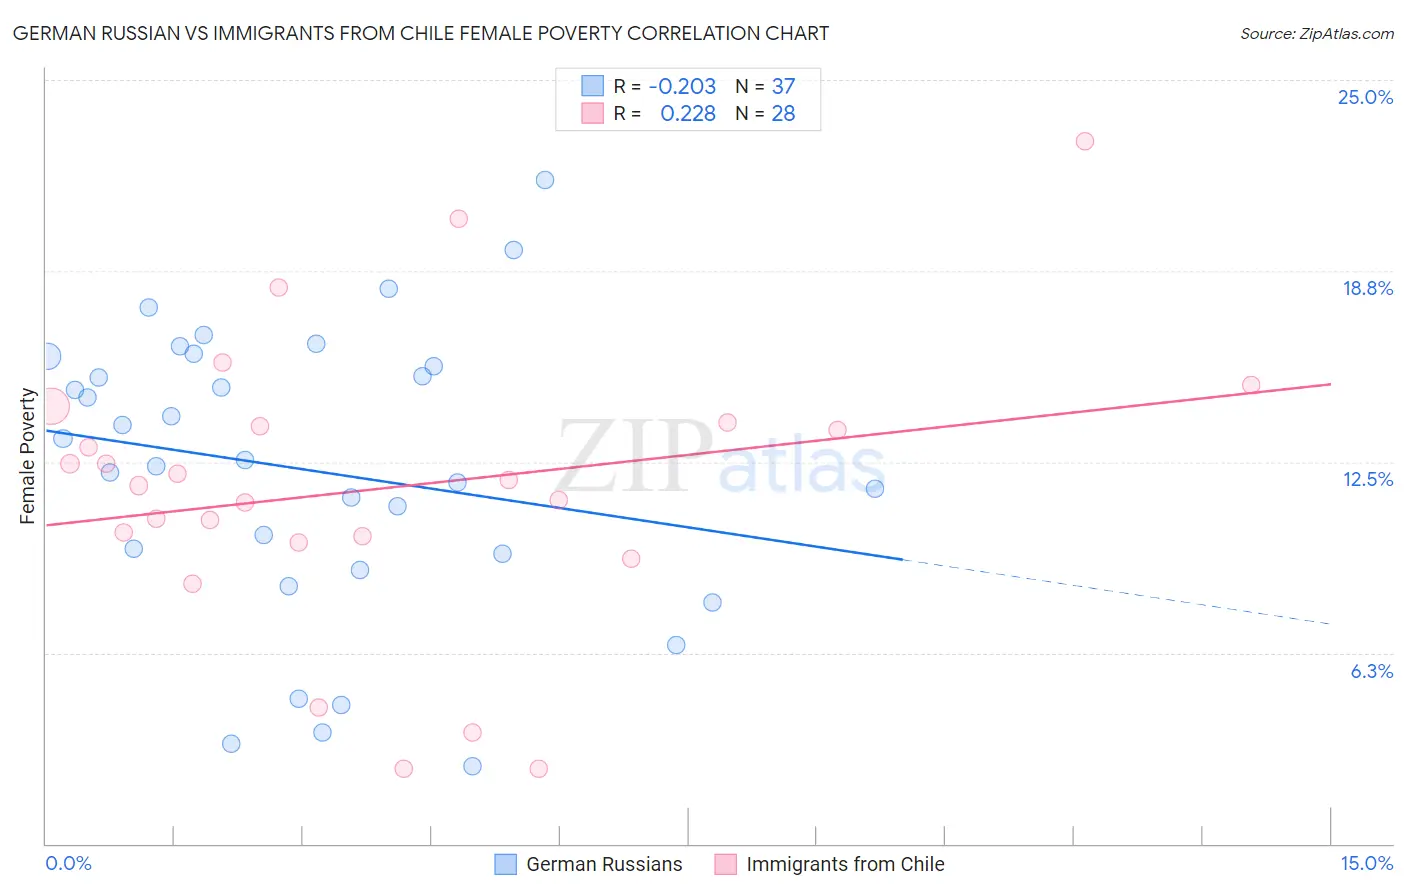 German Russian vs Immigrants from Chile Female Poverty